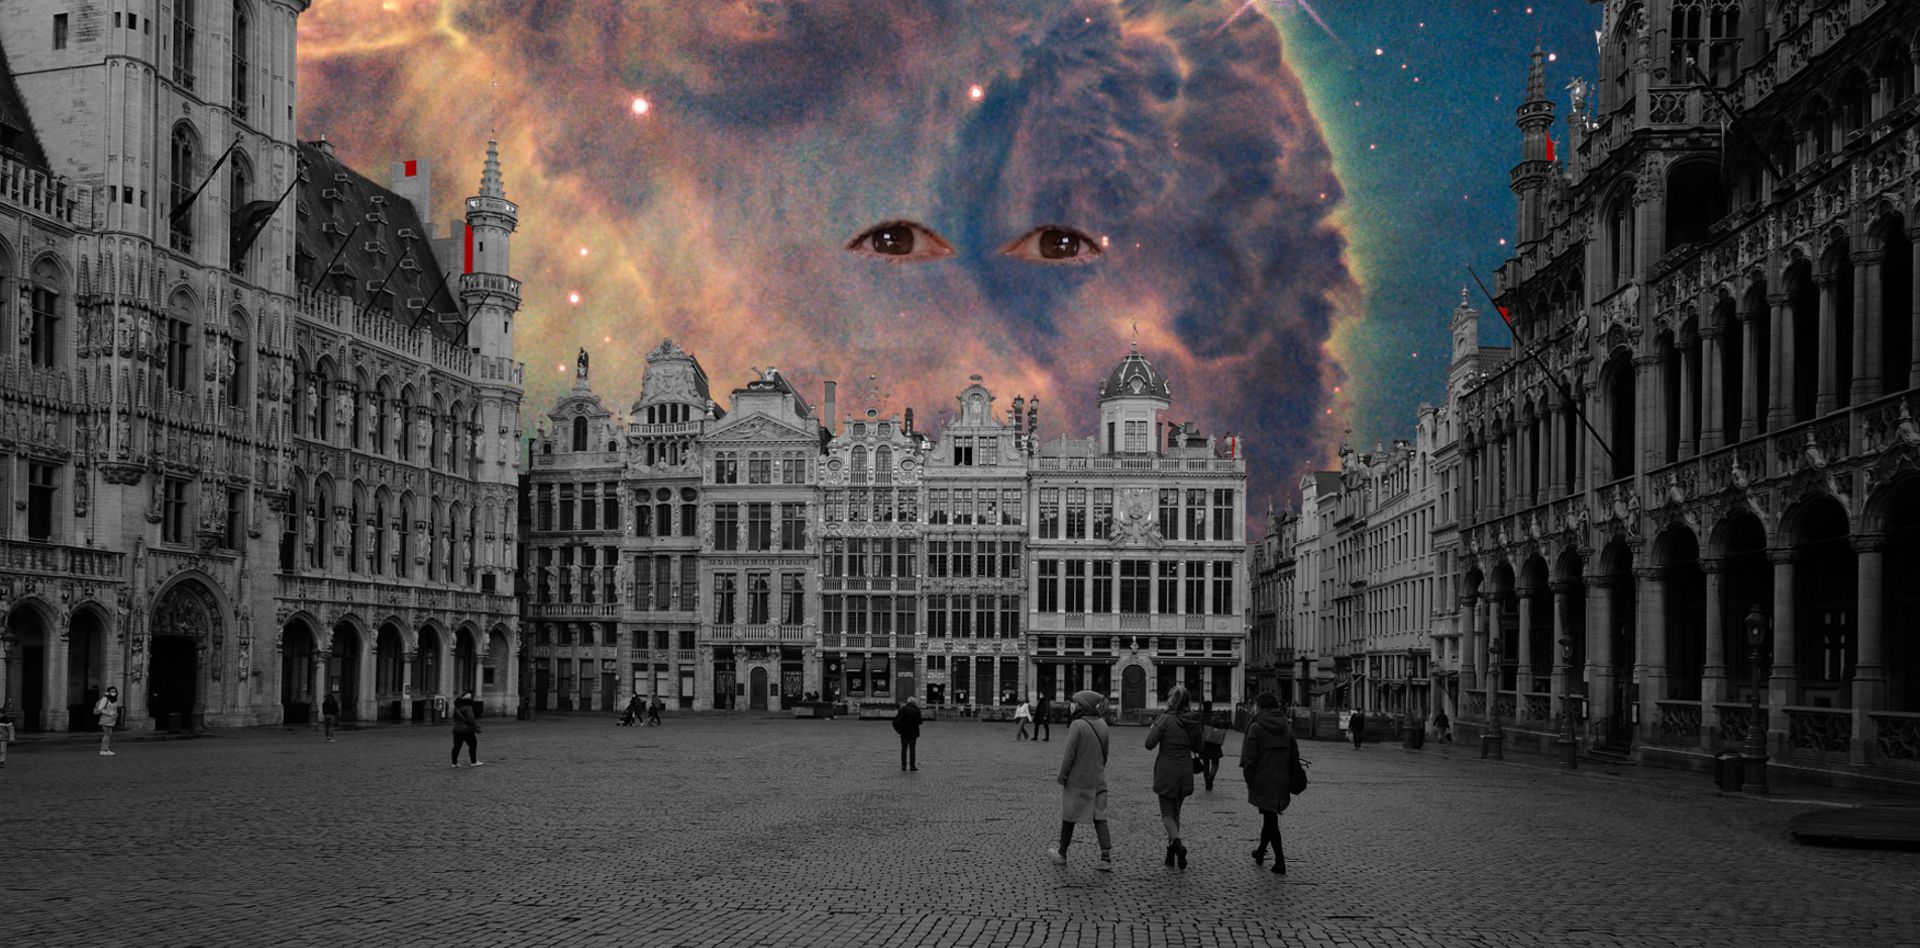 Nebula with eyes over Grand Place, Brussels